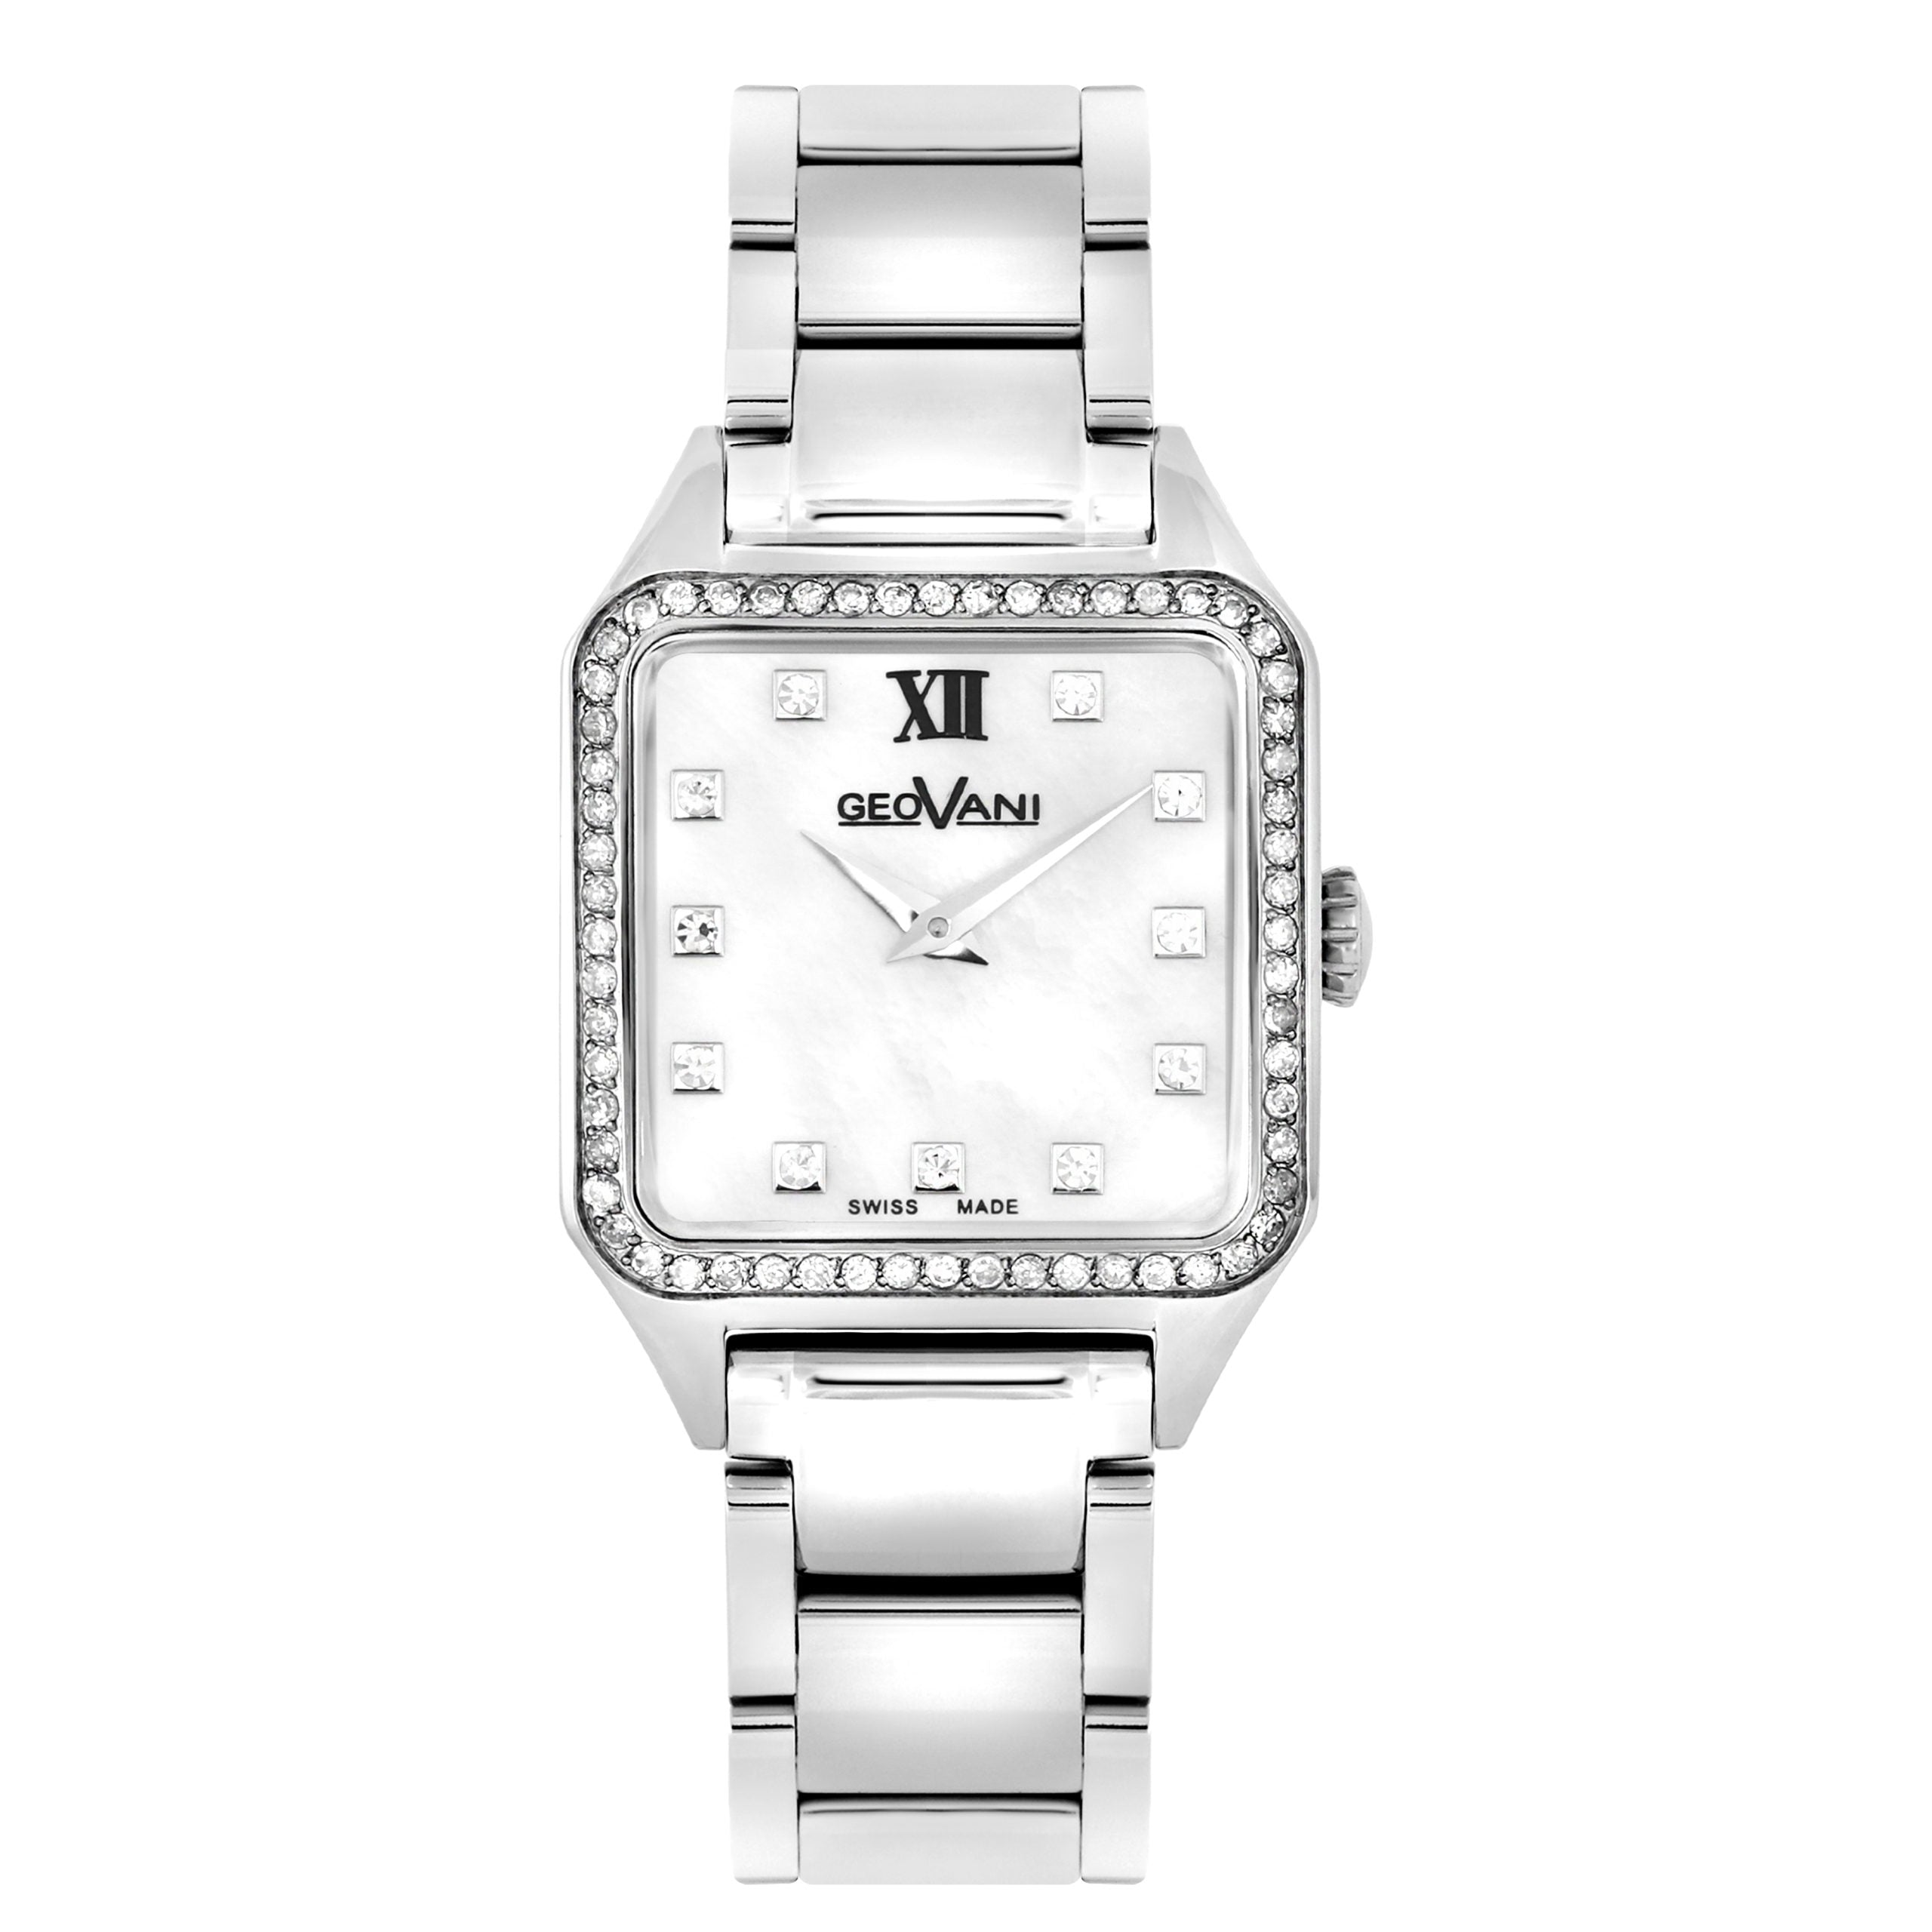 Giovanni Women's Swiss Quartz Watch with Pearly White Dial - GEO-0011